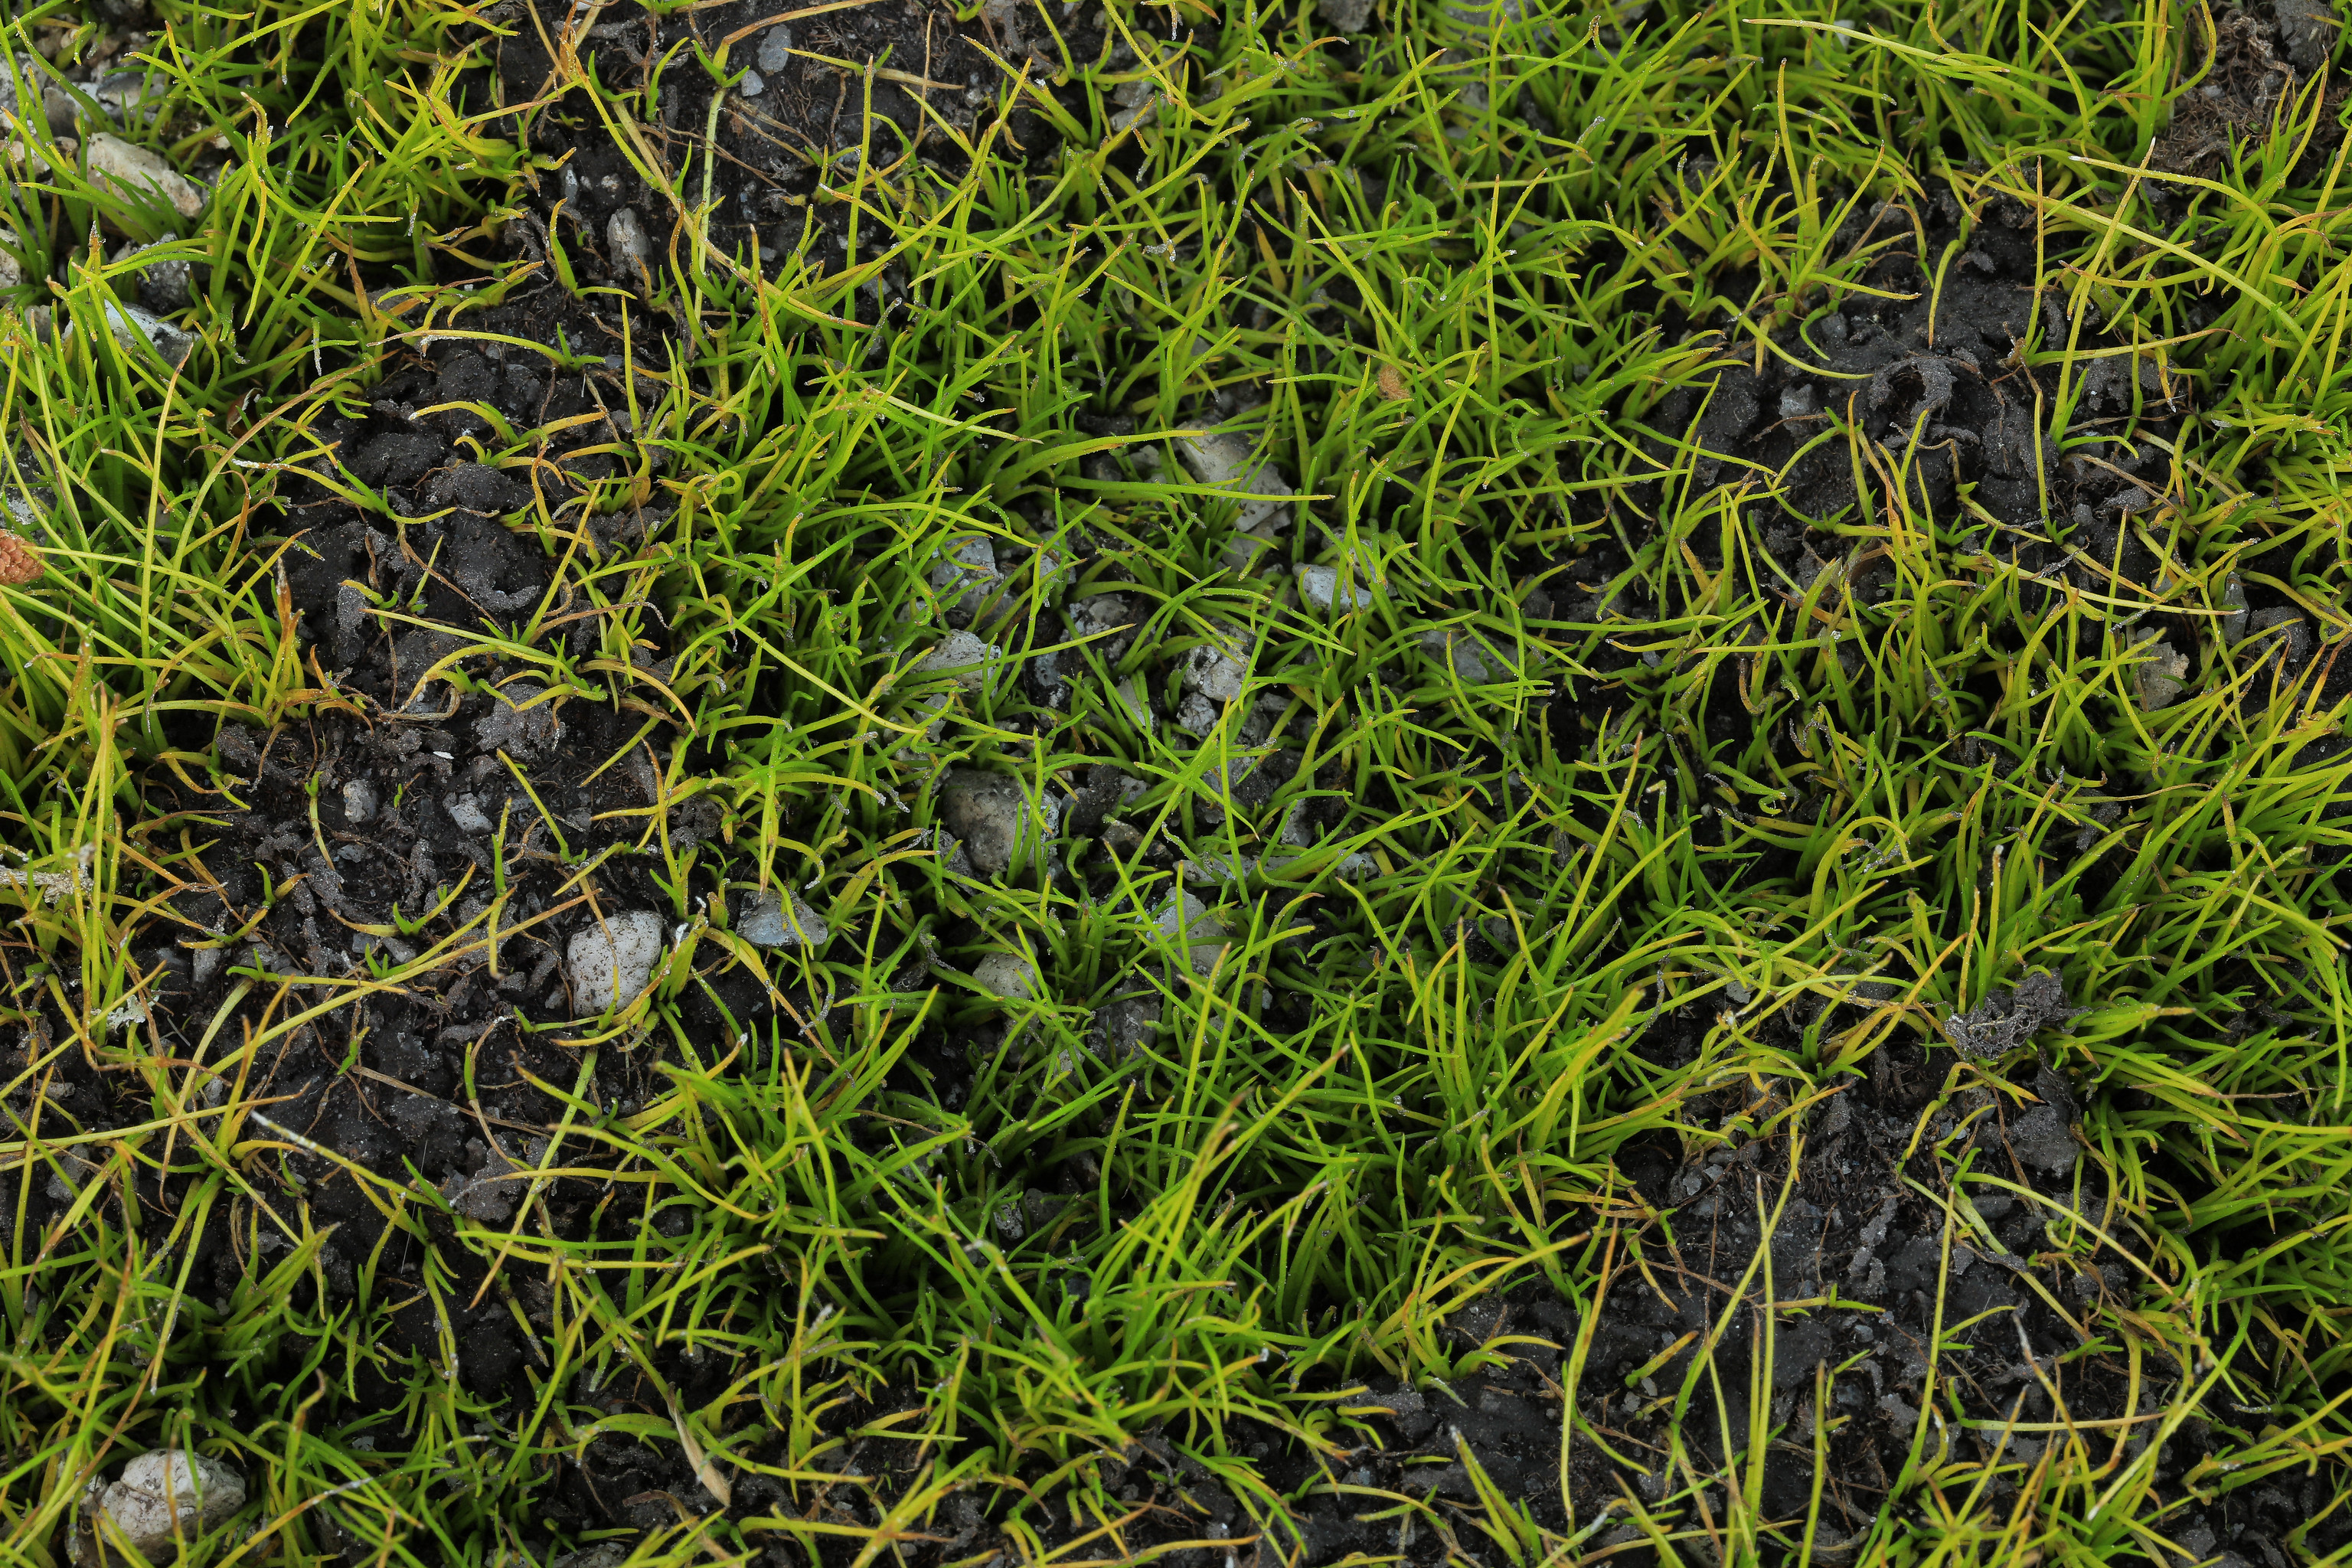 Small filamentous plant grows in a shallow rocky bed of soil